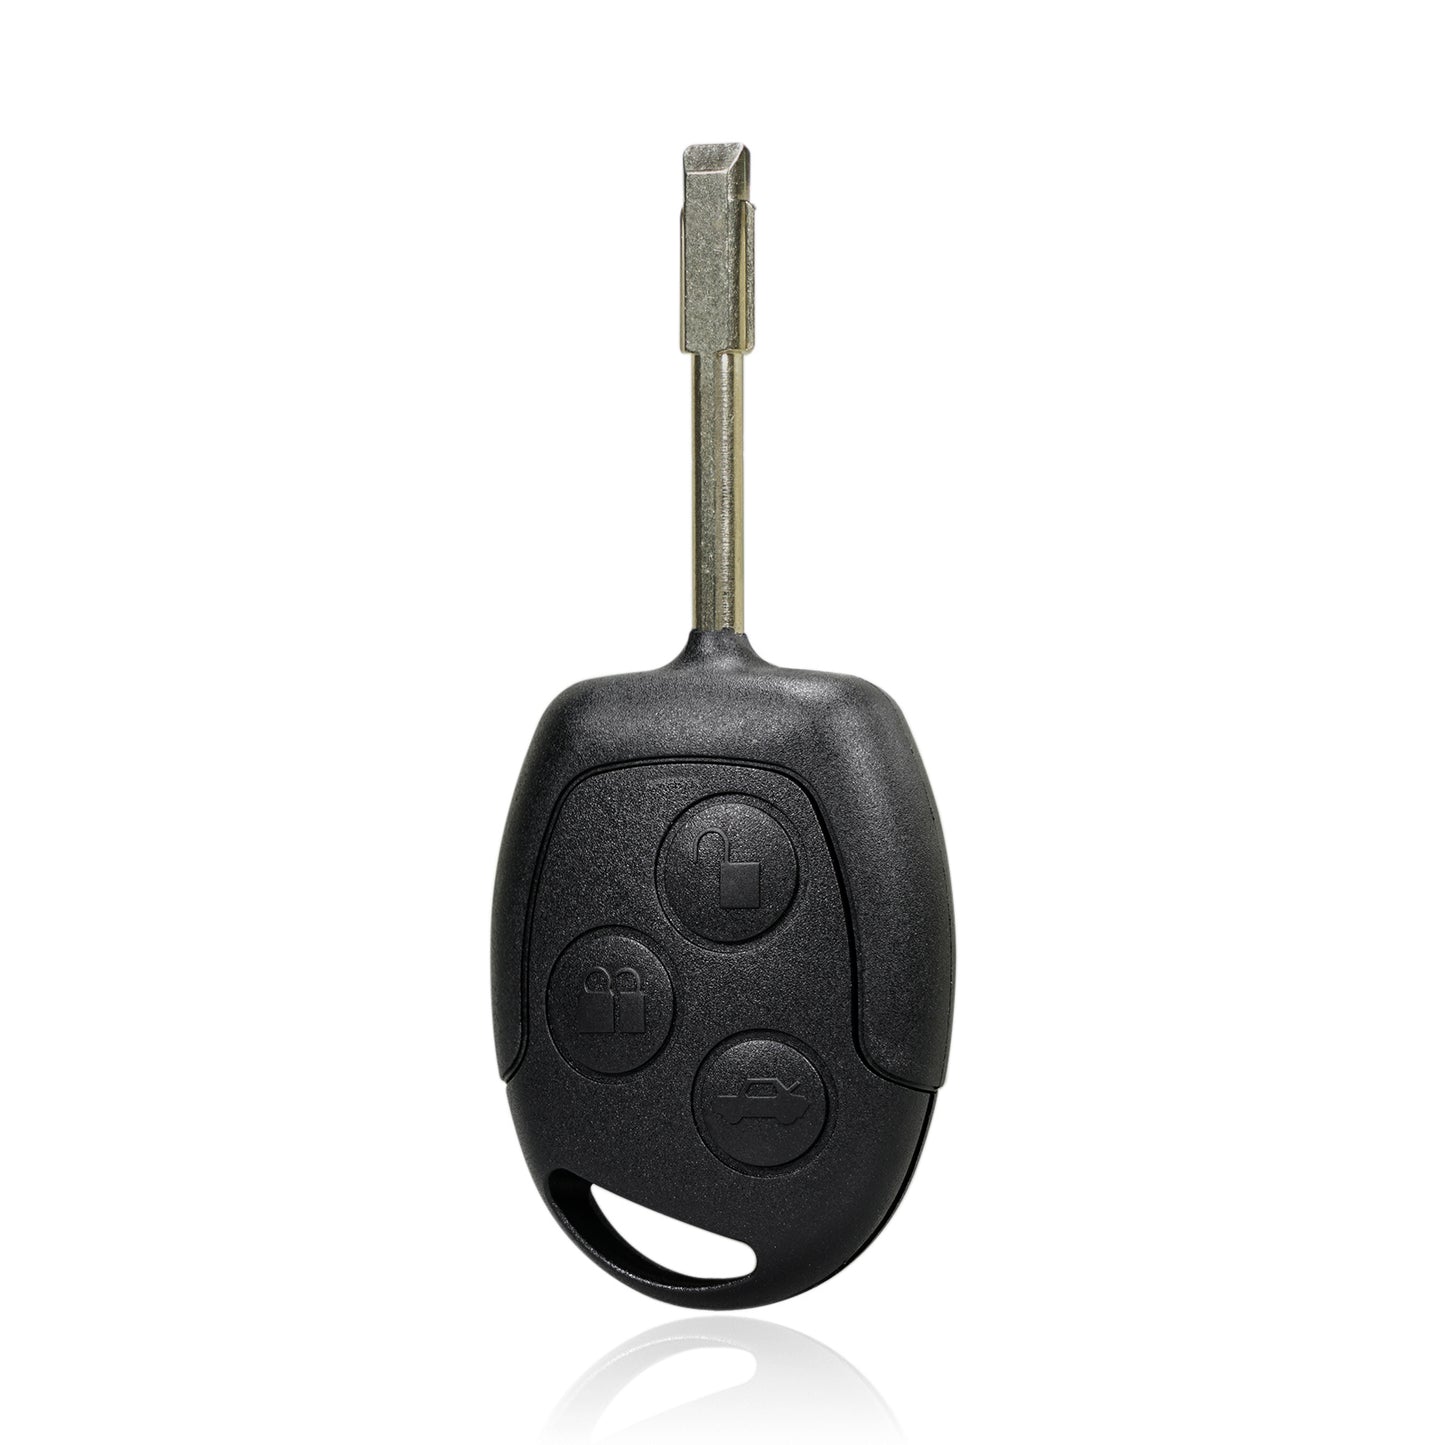 3 Buttons 315MHz Keyless Entry Fob Remote Car Key For 2010-2013 Ford Transit Connect FCC ID: KR55WK47899 SKU : J733